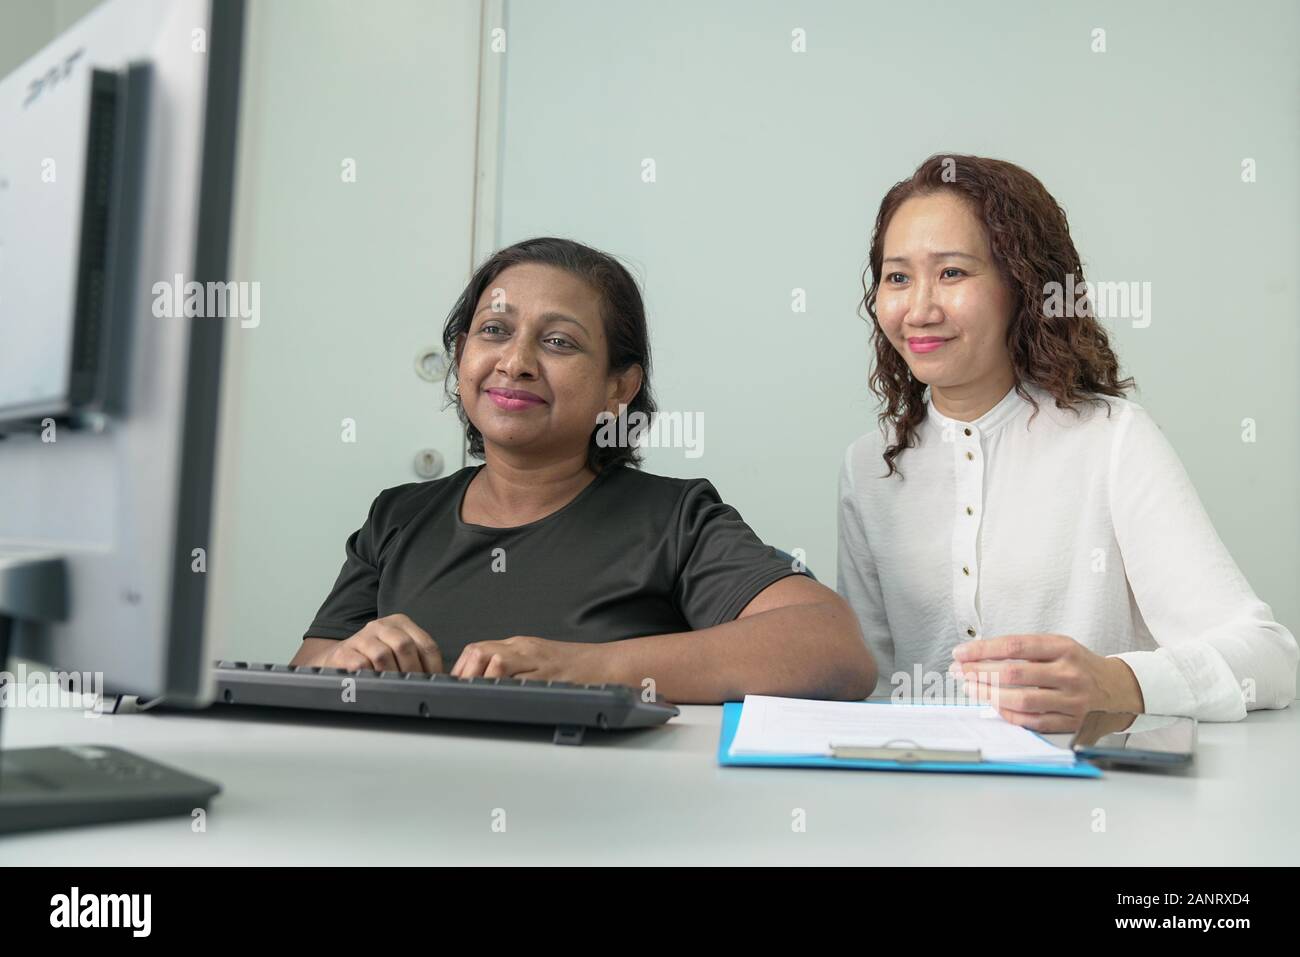 Two businesswomen or corporate professionals working together and in a discussion. Office table with computer. Stock Photo